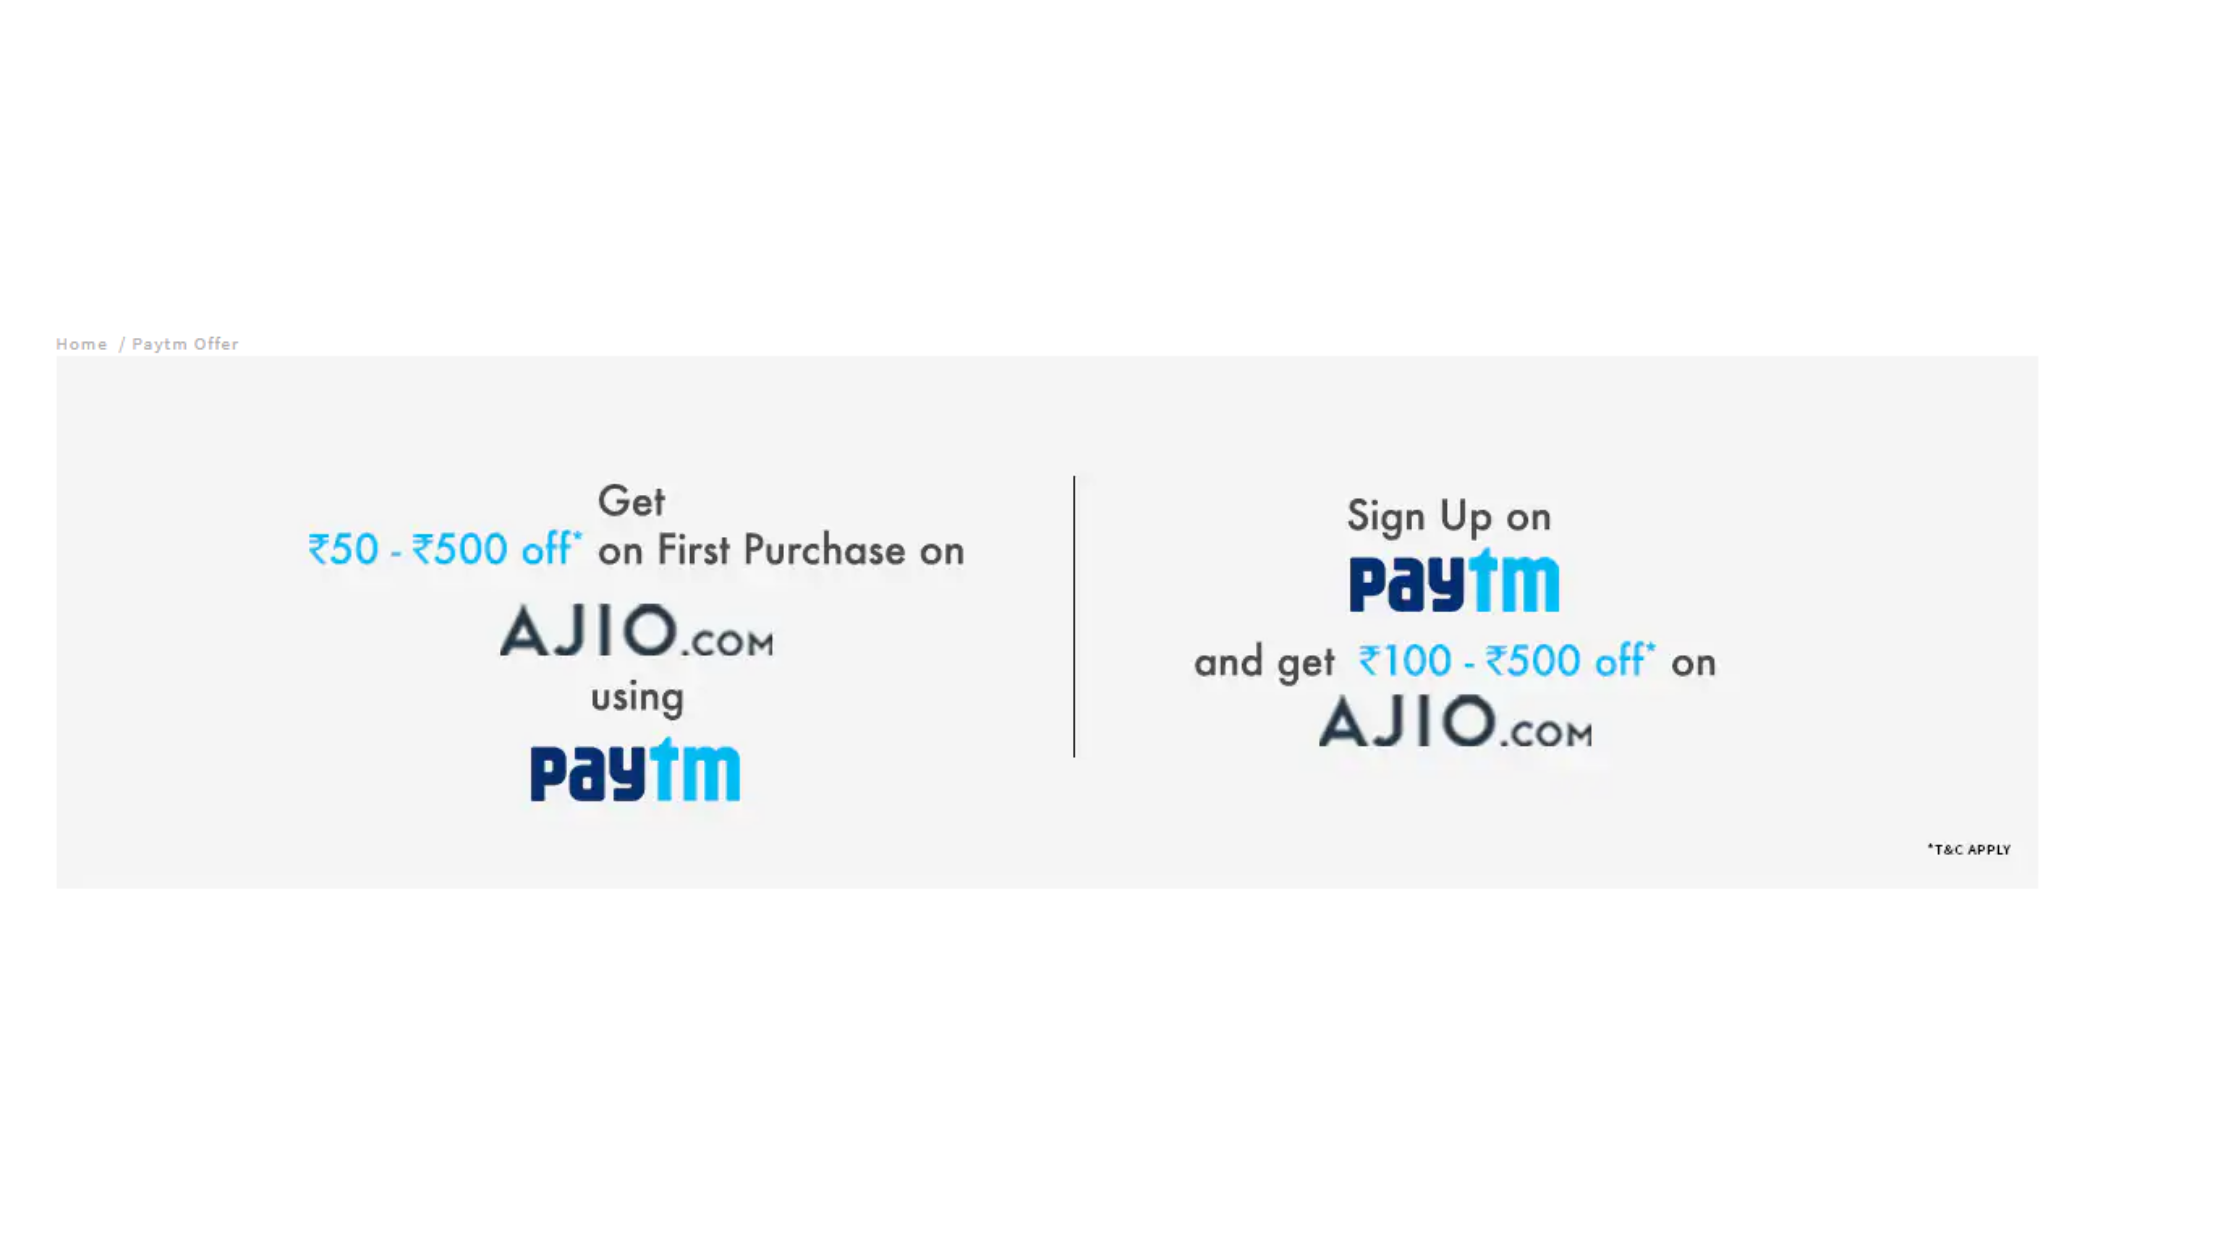 Paytm Ajio Offer 2020: Get 50-500 Off on First Purchase 